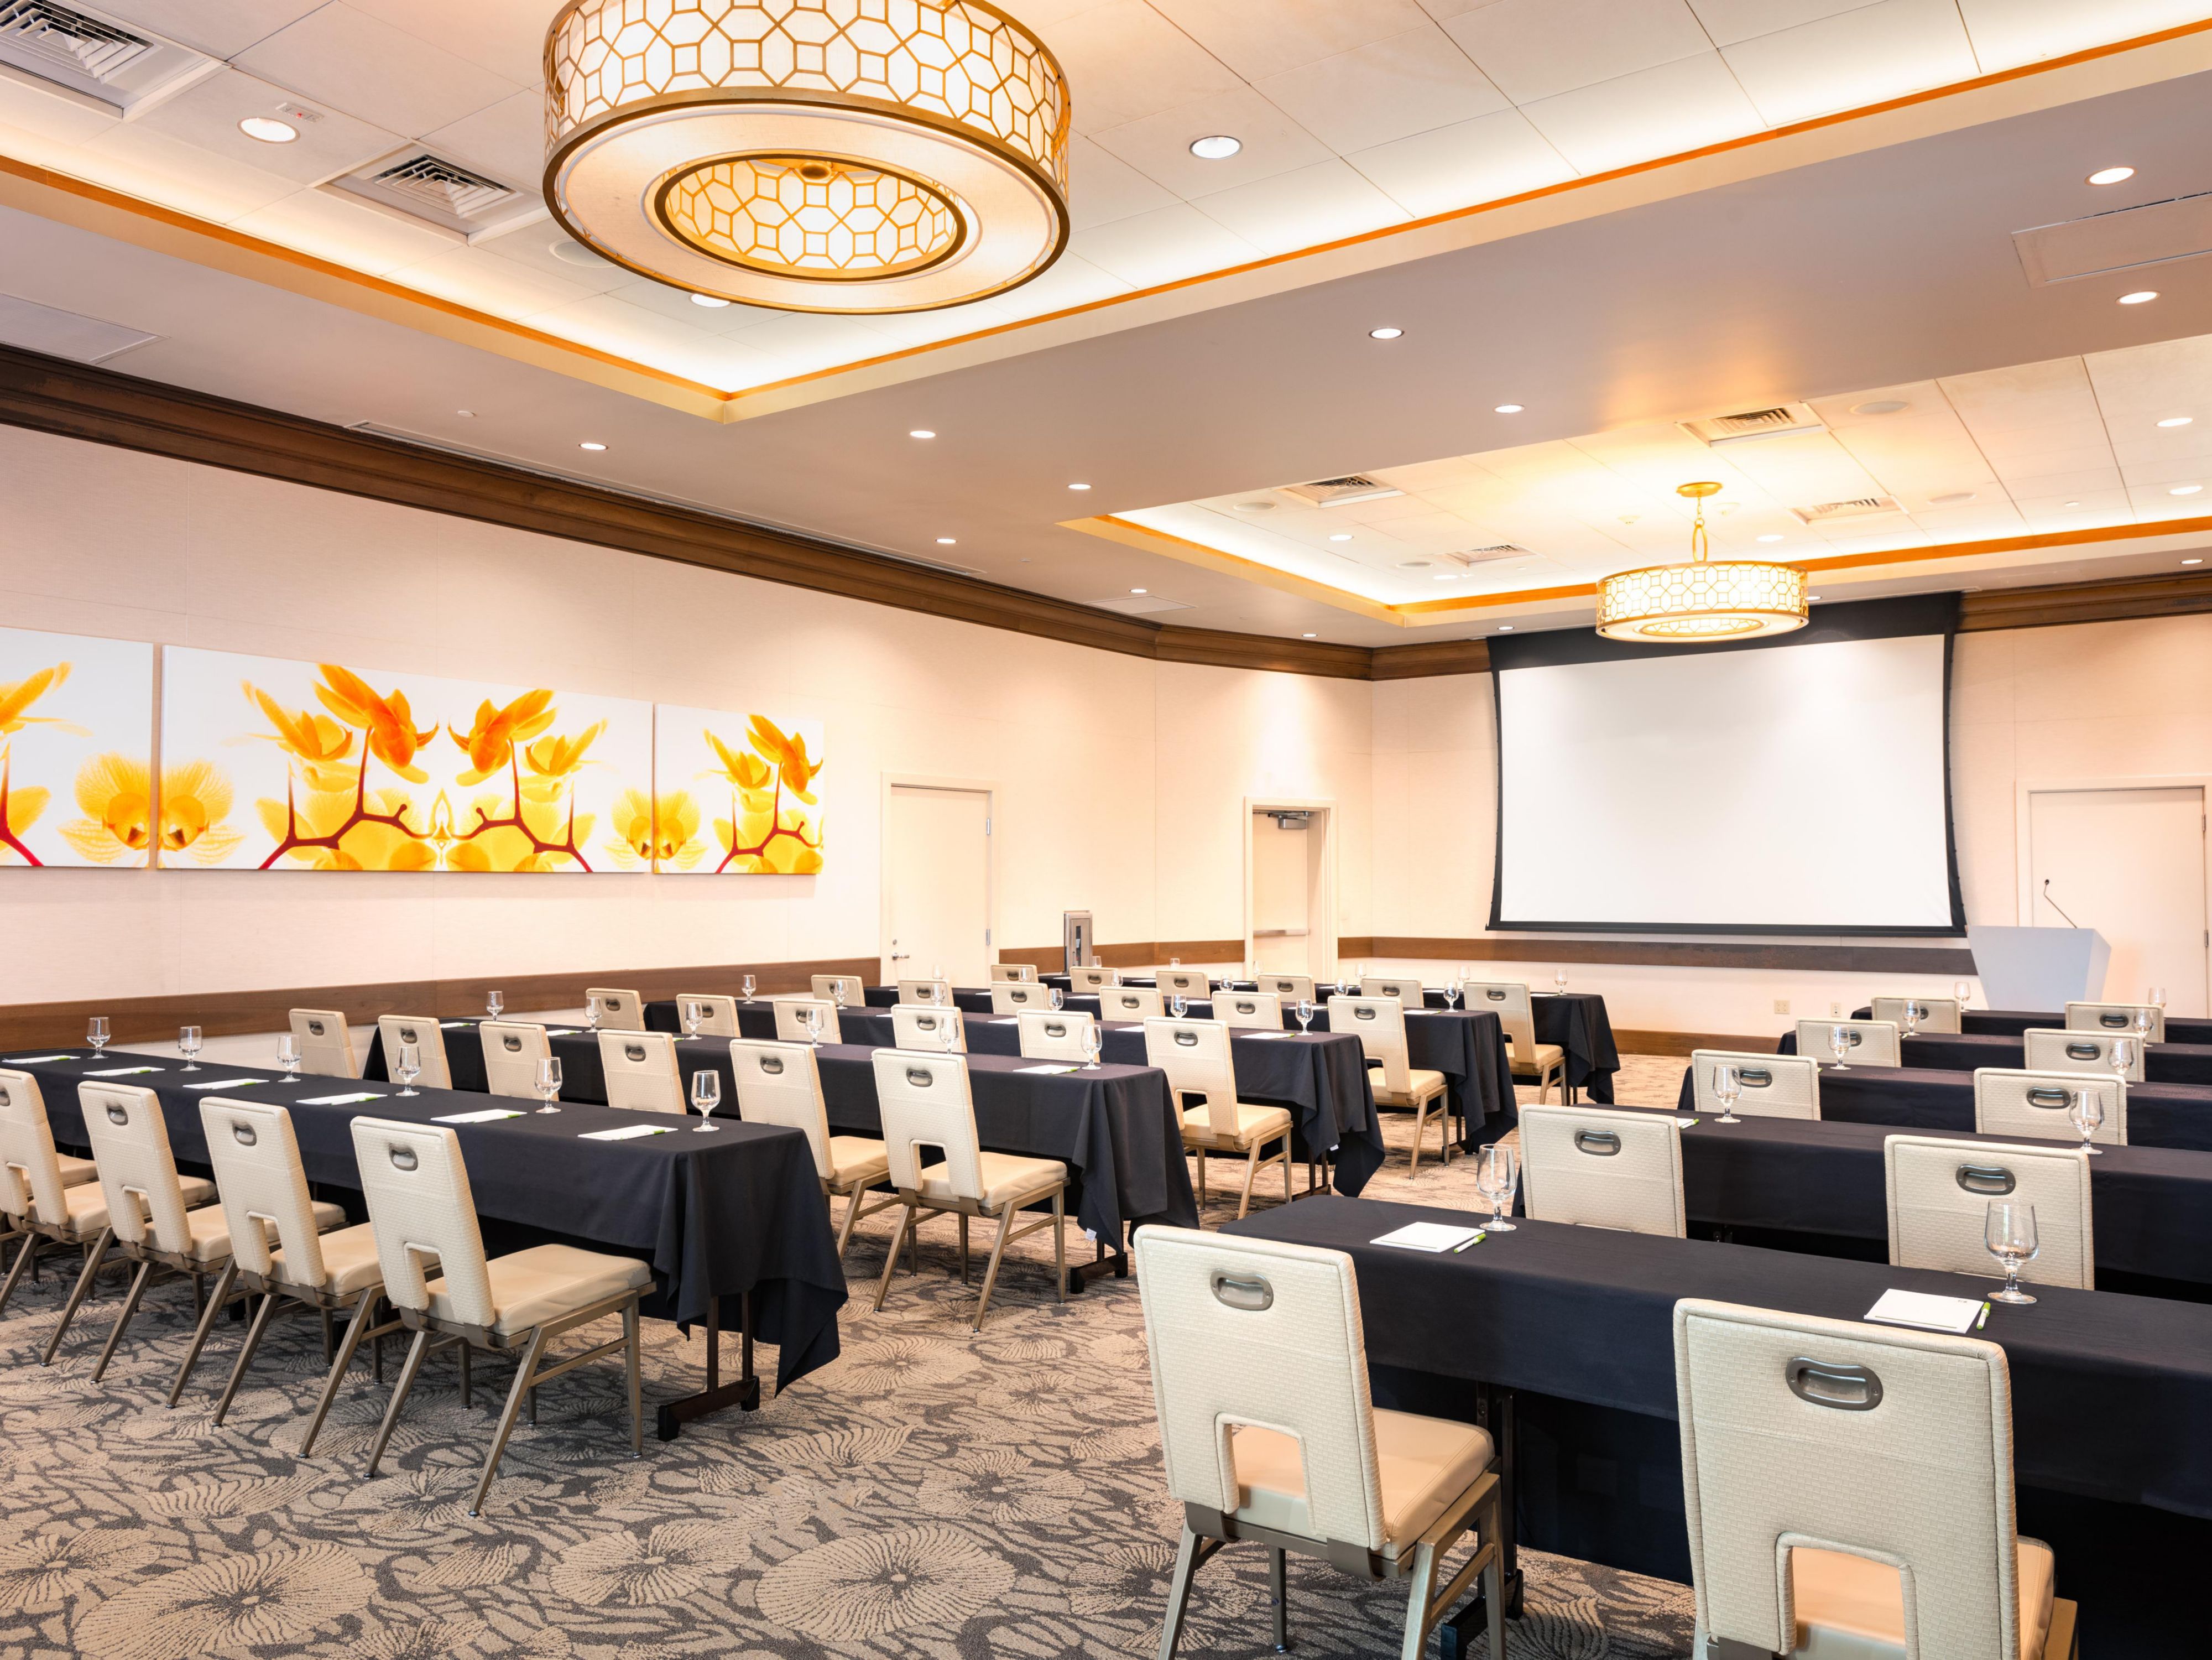 From Business Meetings, to Weddings, and Reunions, being together matters. Experience our versatile meeting space in one of San Diego’s premiere locations for your next event with our 8,205 sq. ft. of flexible meeting space, as well as 2500 sq. ft. of outdoor garden space. We will work with you to set up all the essentials needed for your meeting.